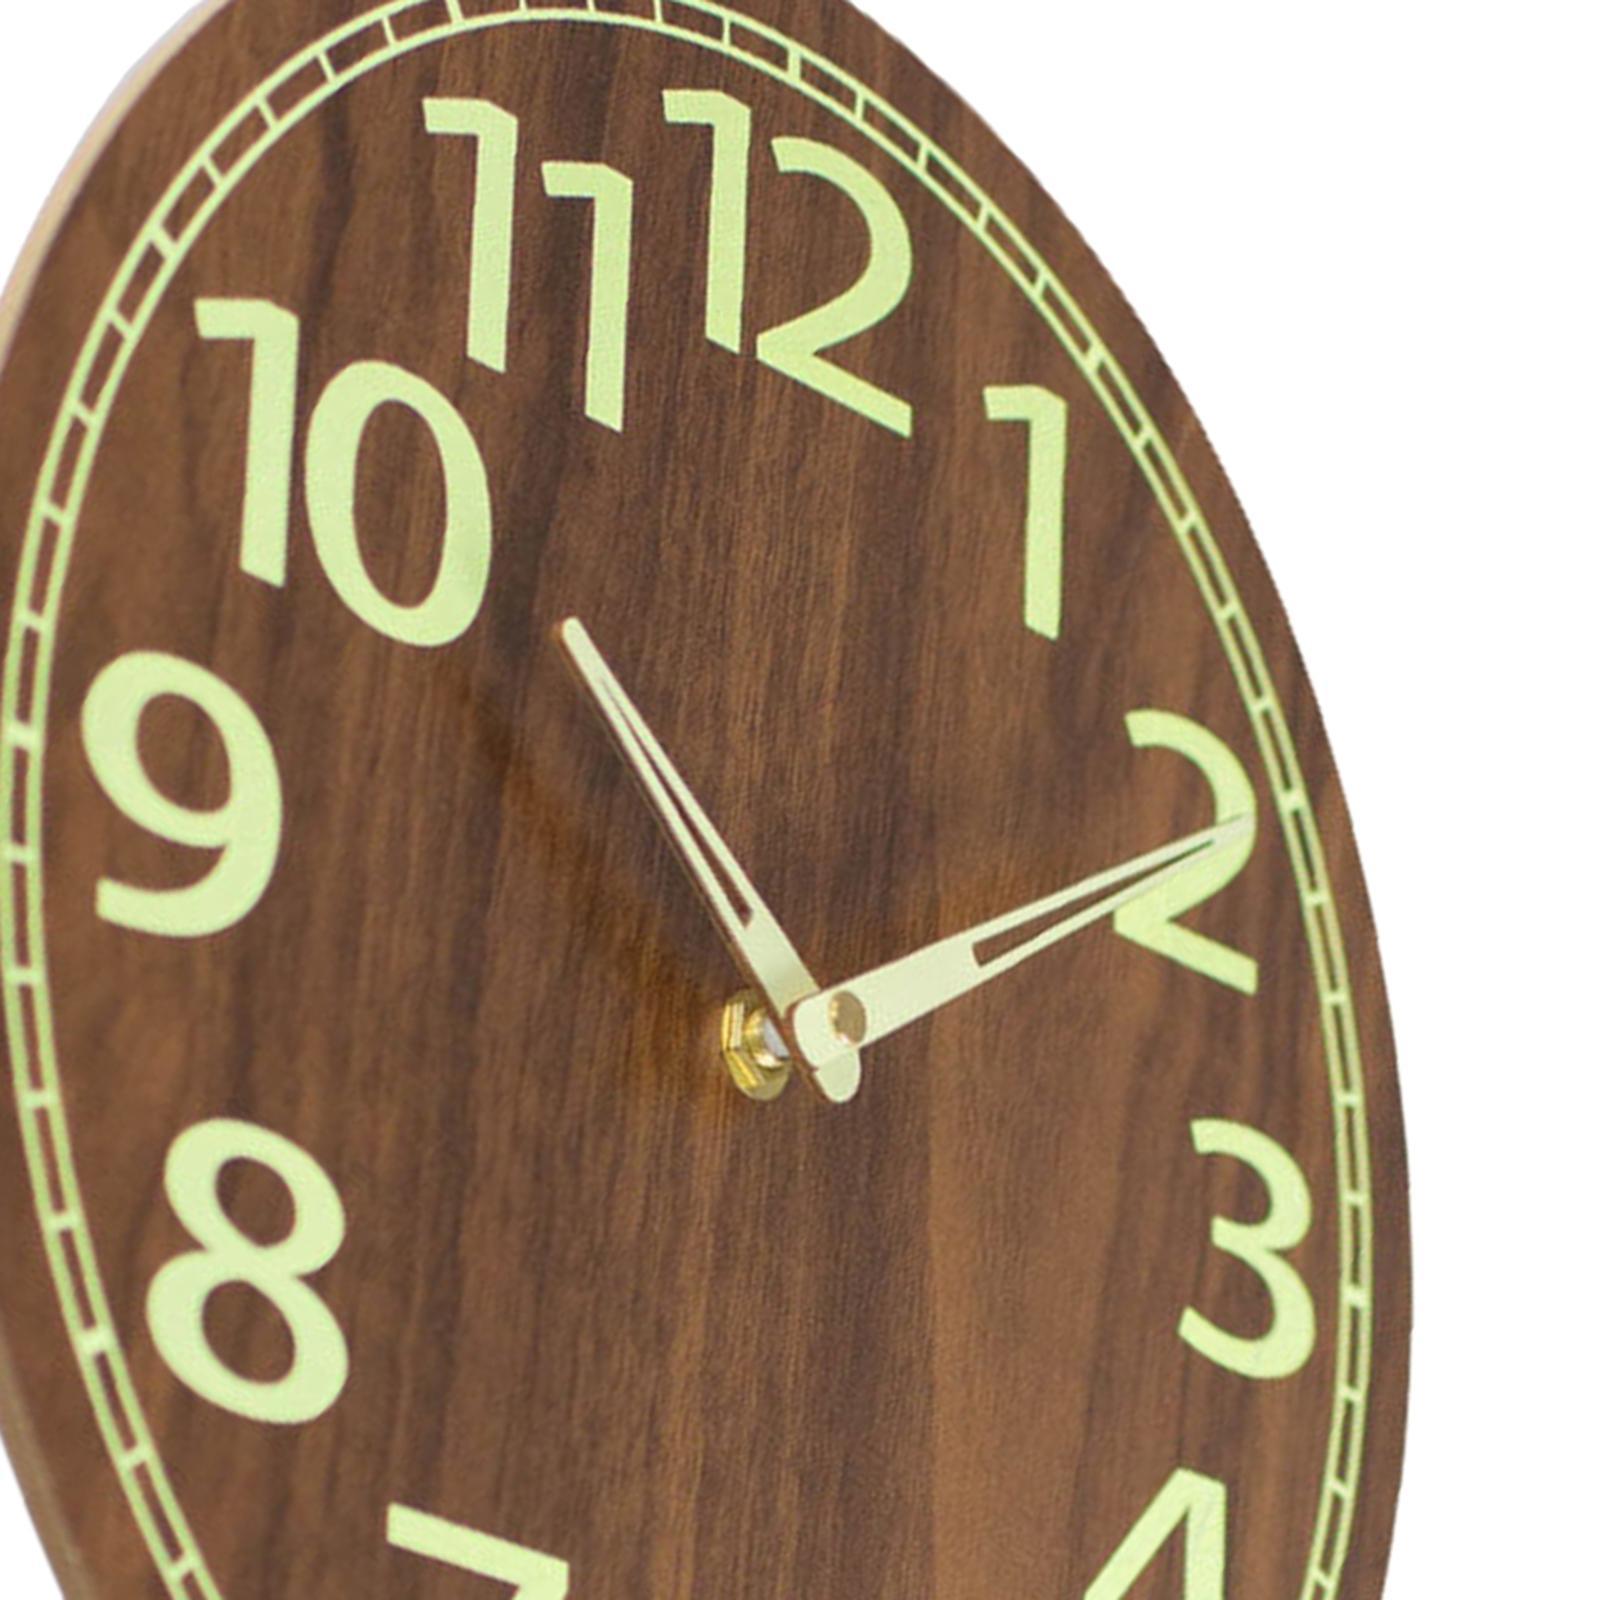 12 inch Luminous Wall Clock Wooden Wall Clock Round Non Ticking Decorative Silent Analog Clock for Living Room